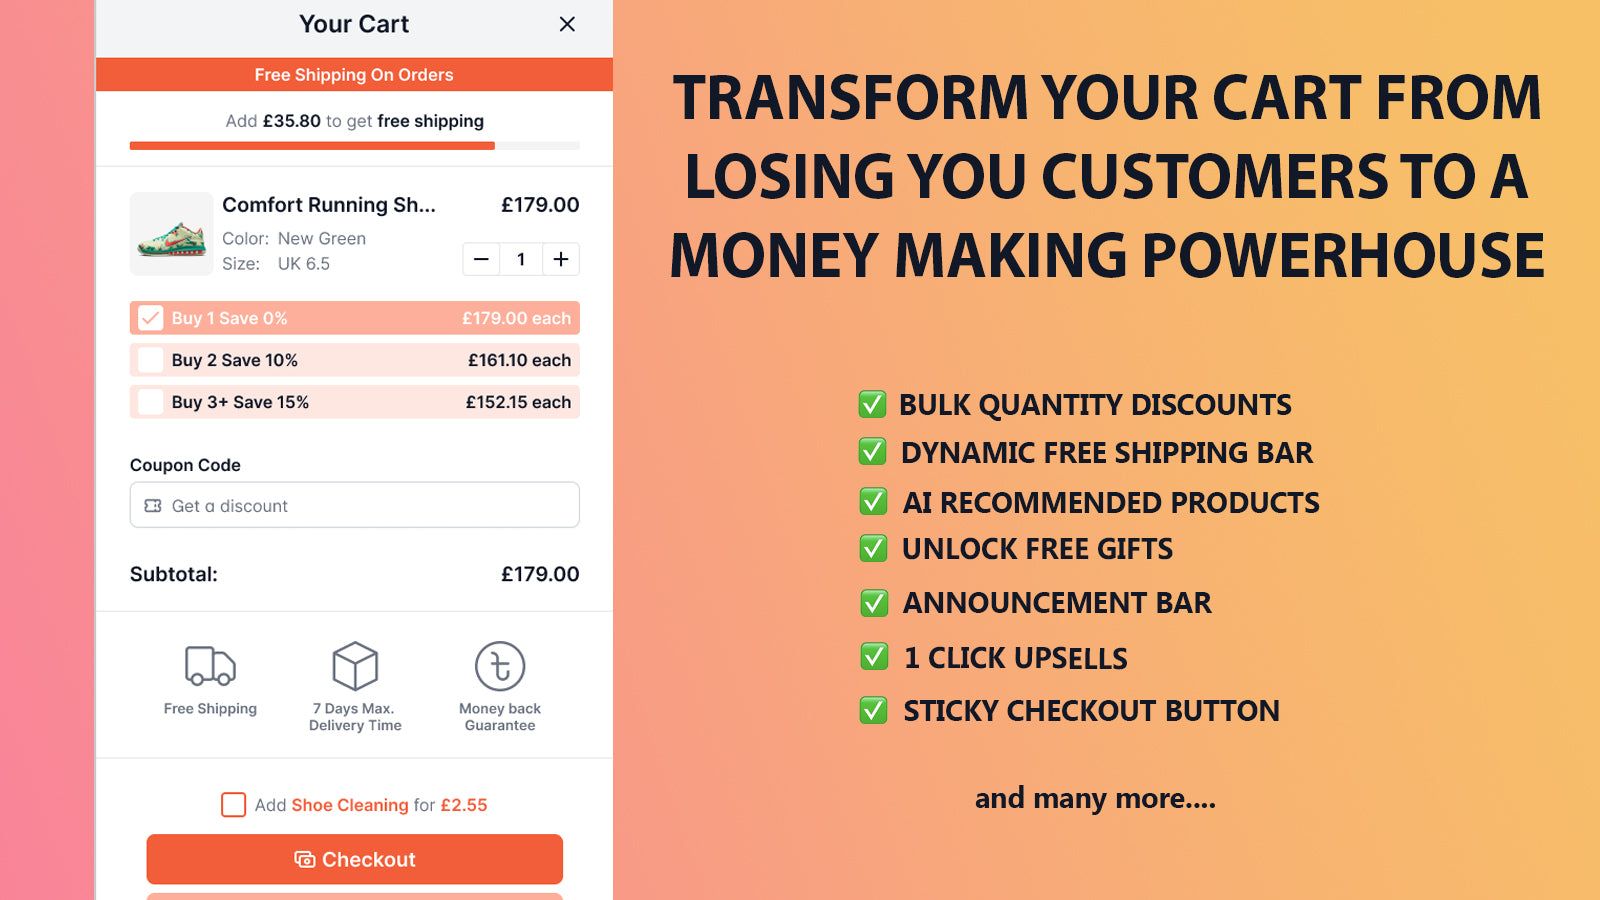 Transform your cart to a money making powerhouse